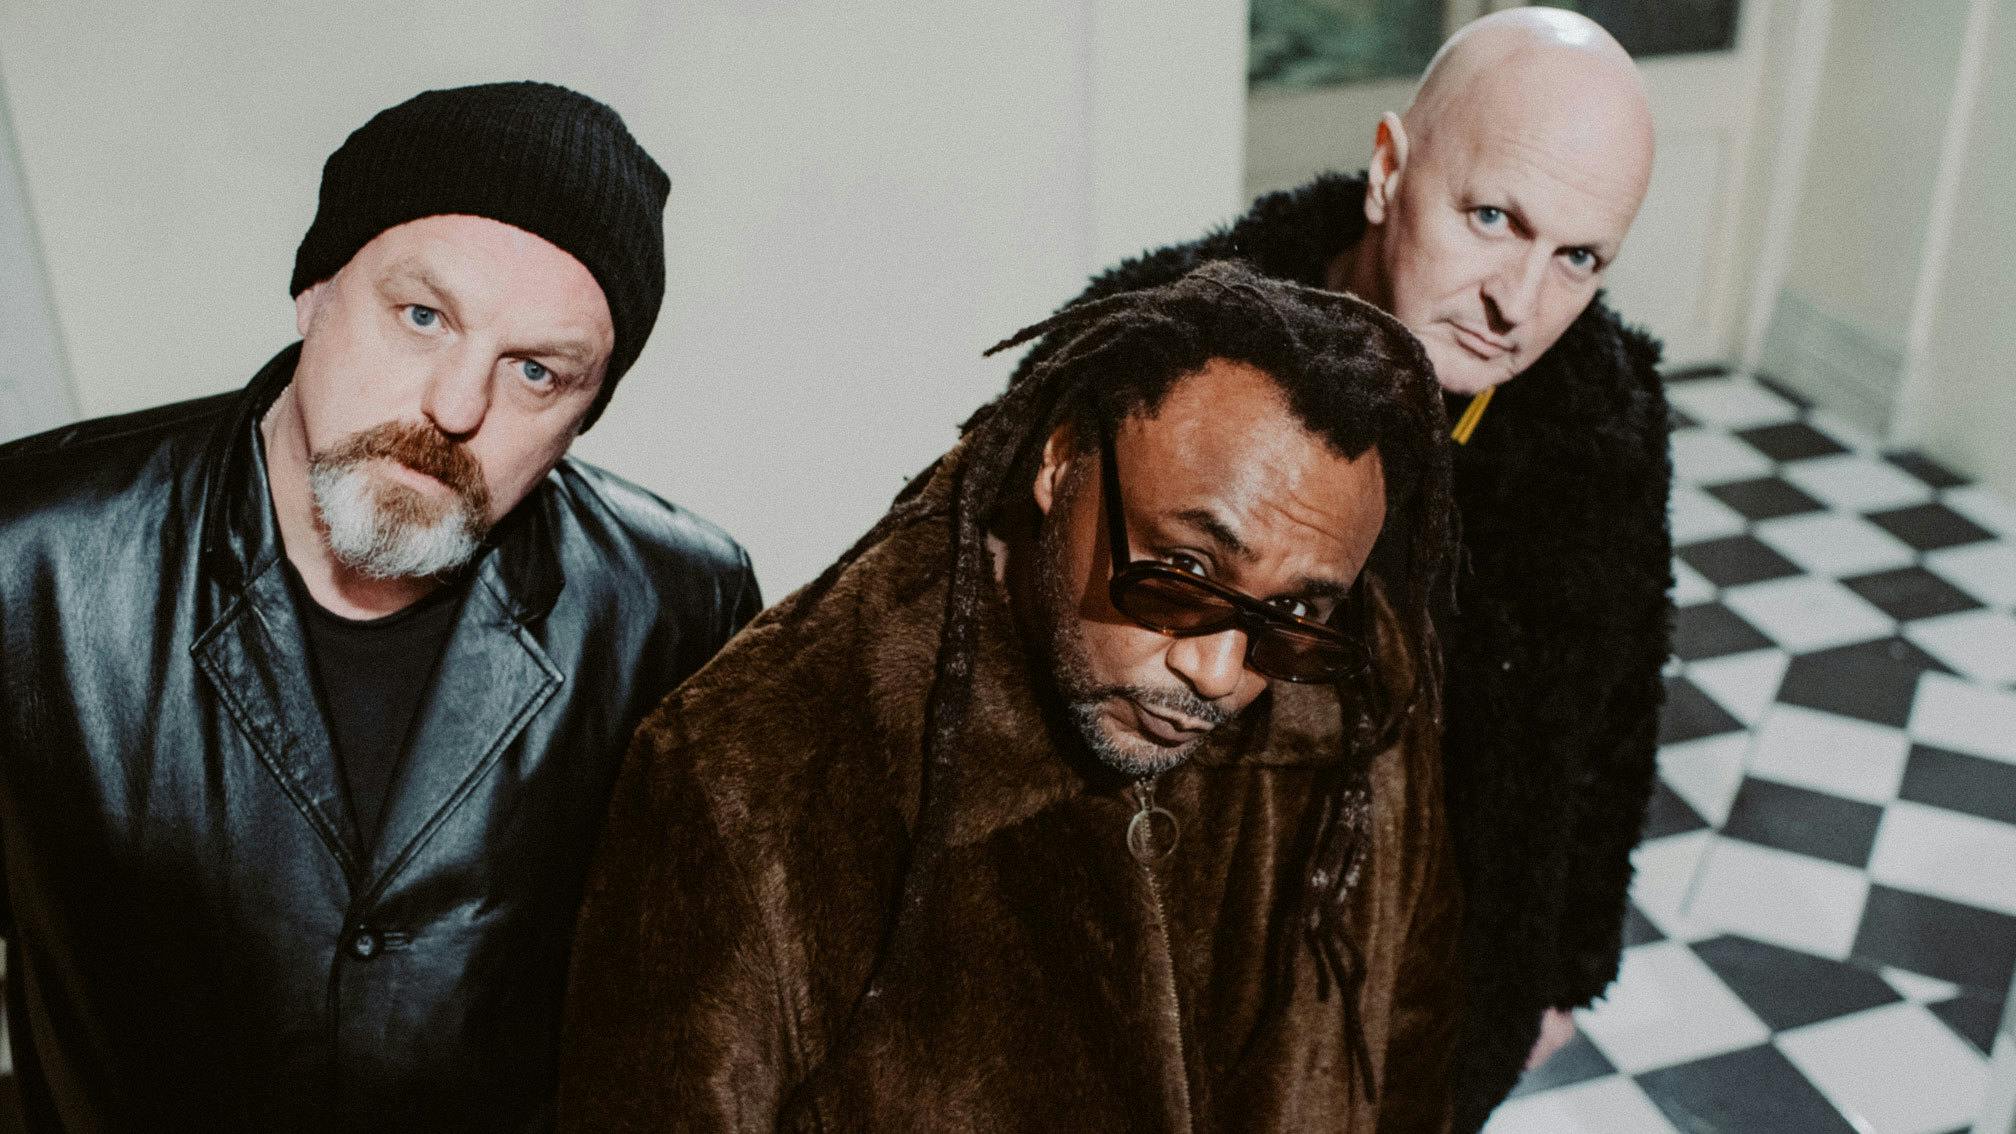 Benji Webbe’s Dub War return with first album of all-new material in over 25 years